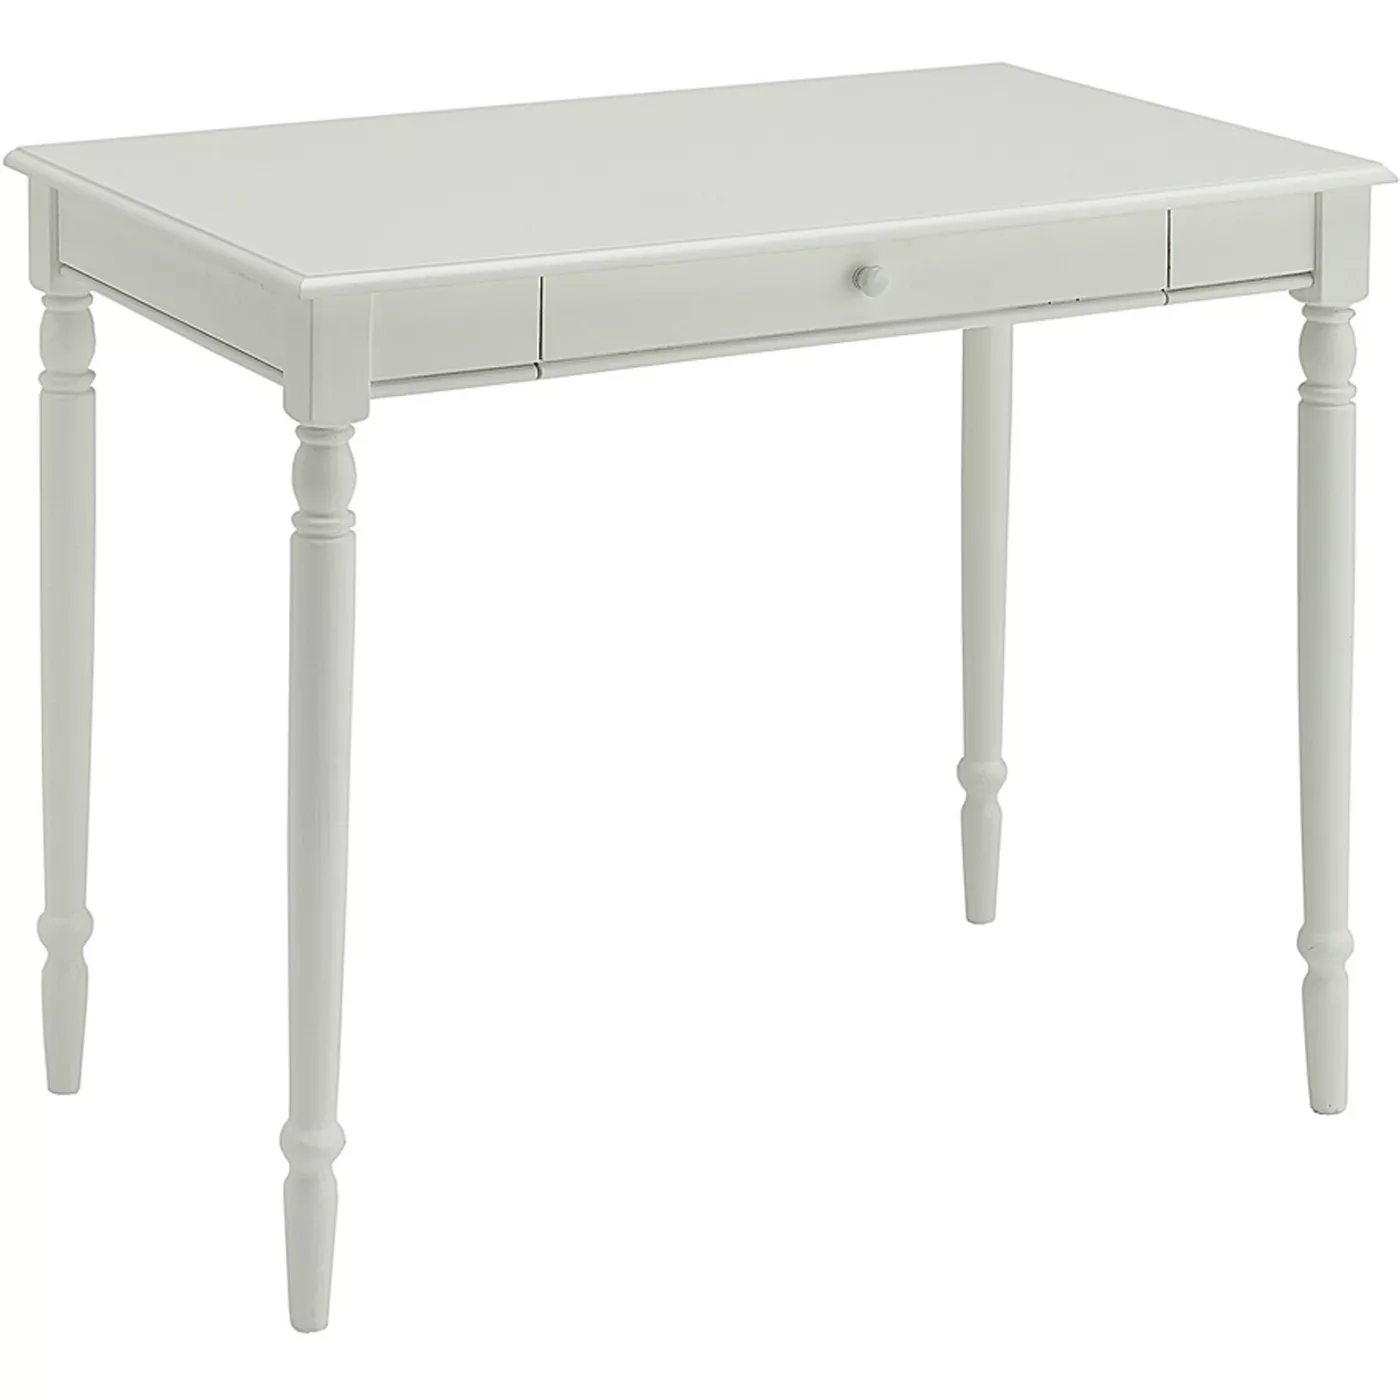 White writing table from Hearth and Home Collection